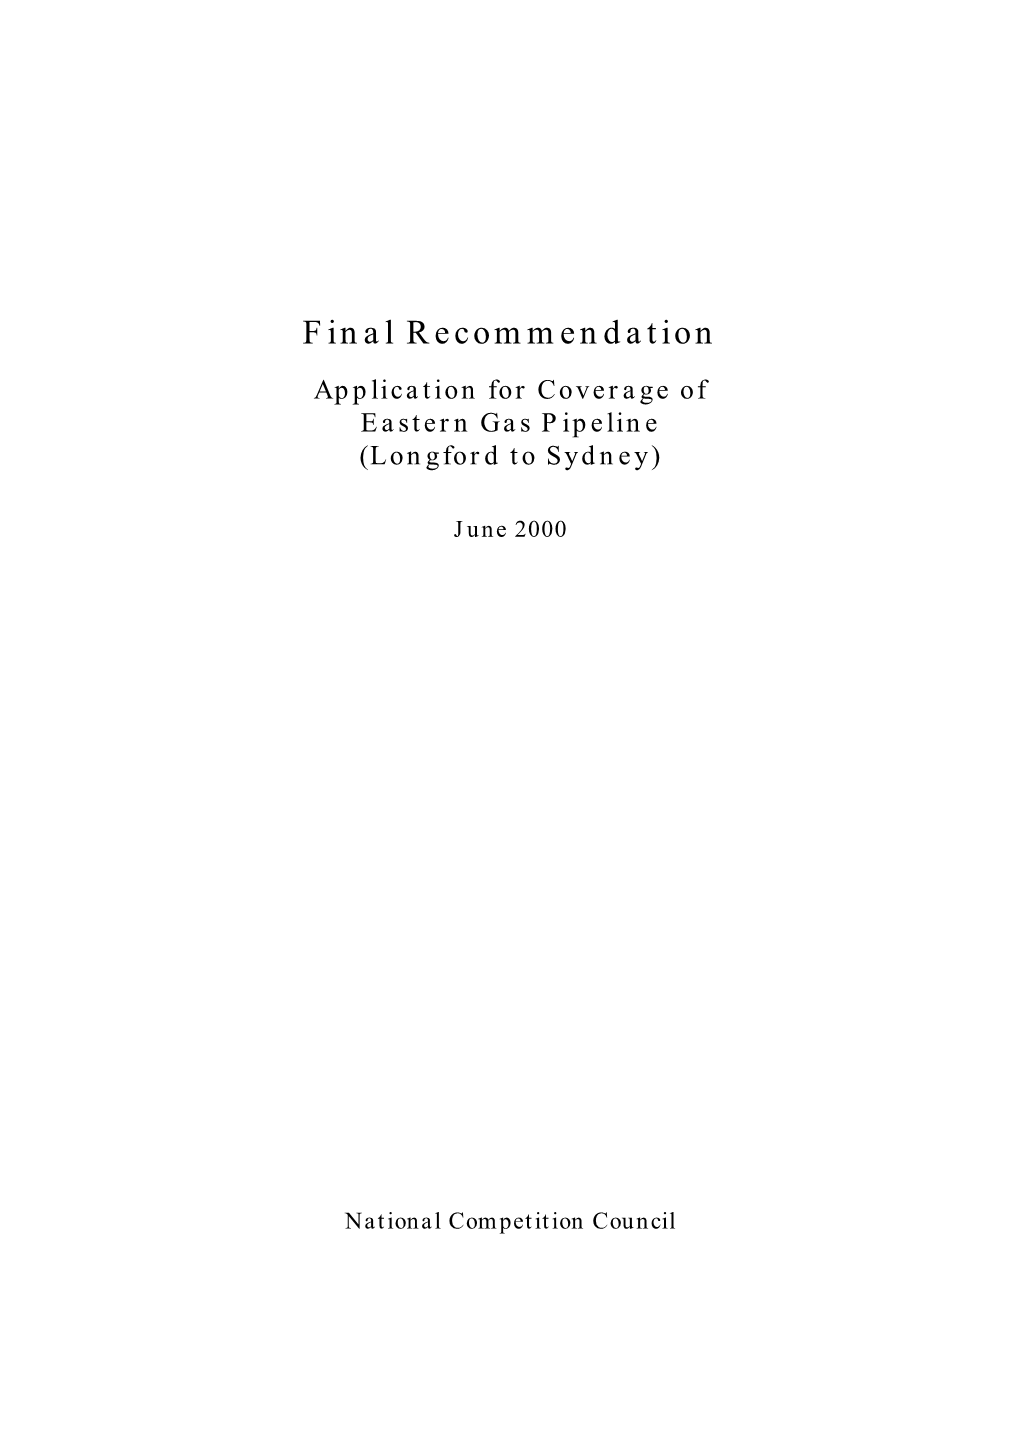 Application for Coverage of the Eastern Gas Pipeline, NCC Final Recommendation, June 2000